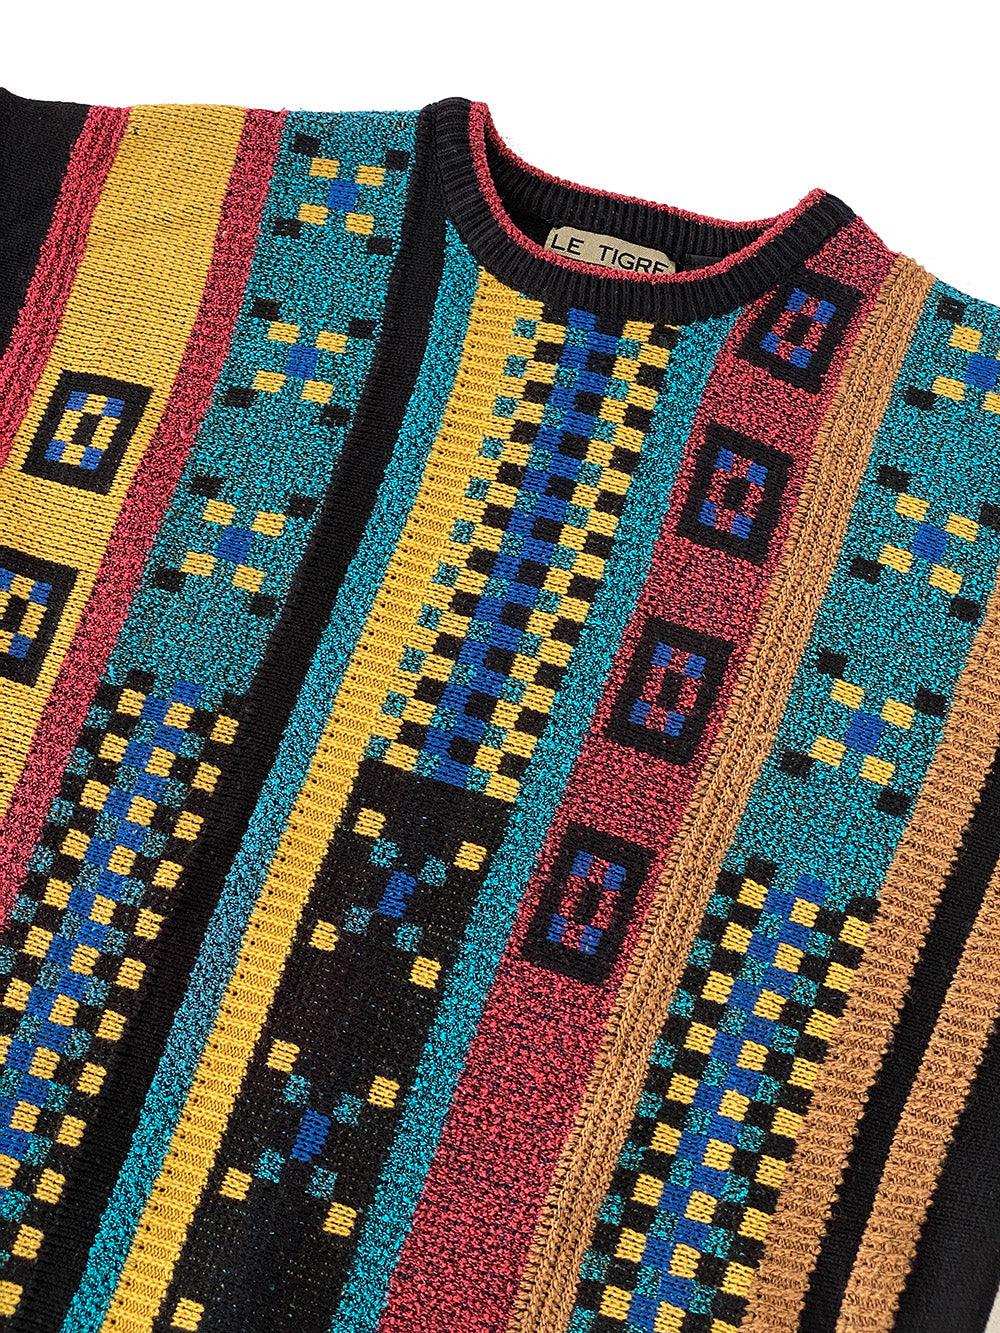 Vintage 80s Le Tigre Geometric Patterned Knit Sweater - Balagan Vintage Sweater 80s, 90s, knitted sweater, NEW IN, sweater, unisex